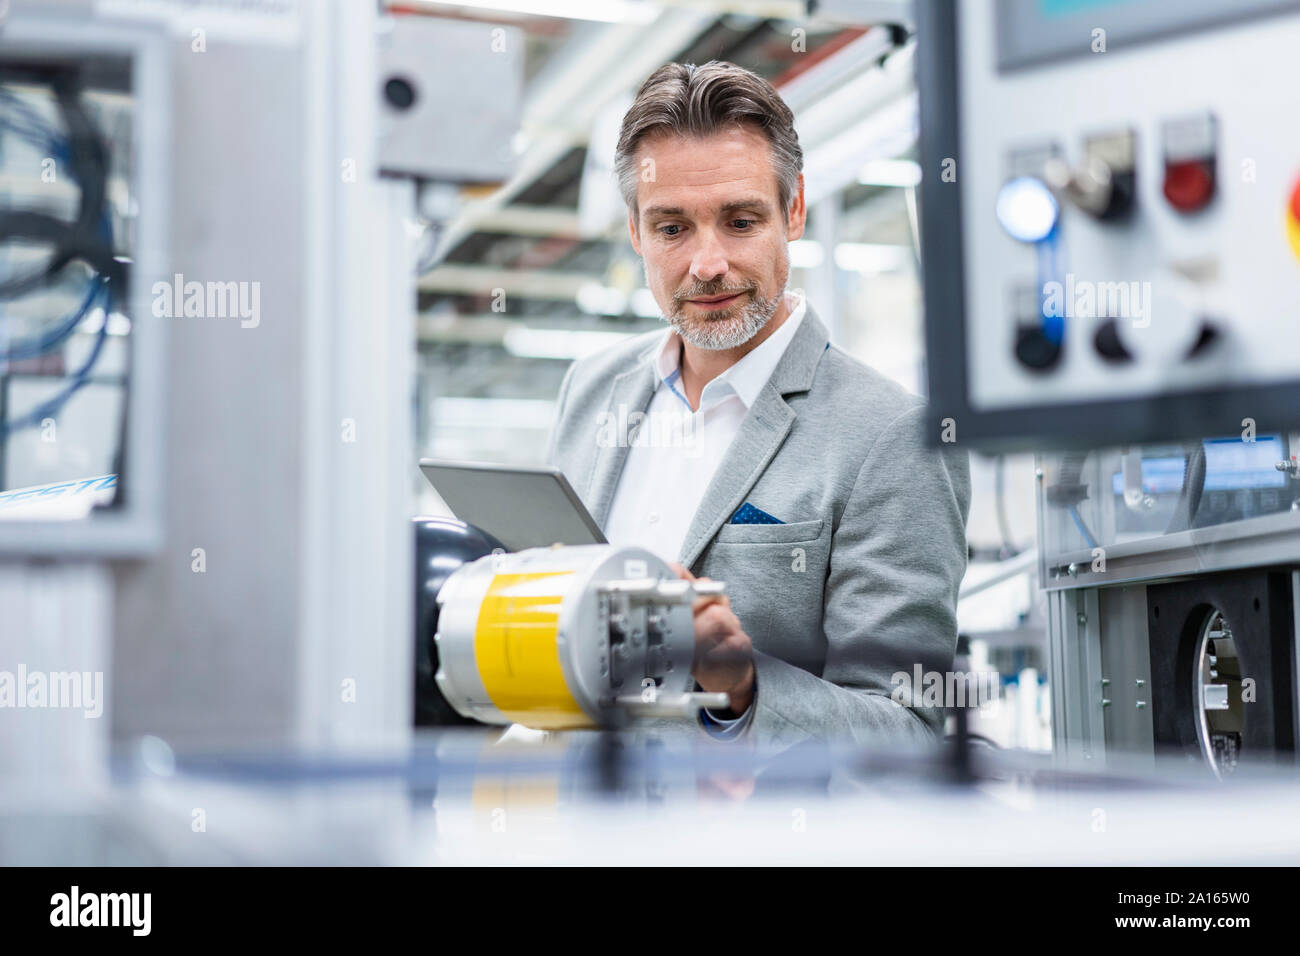 Businessman with tablet at assembly robot in a factory Stock Photo